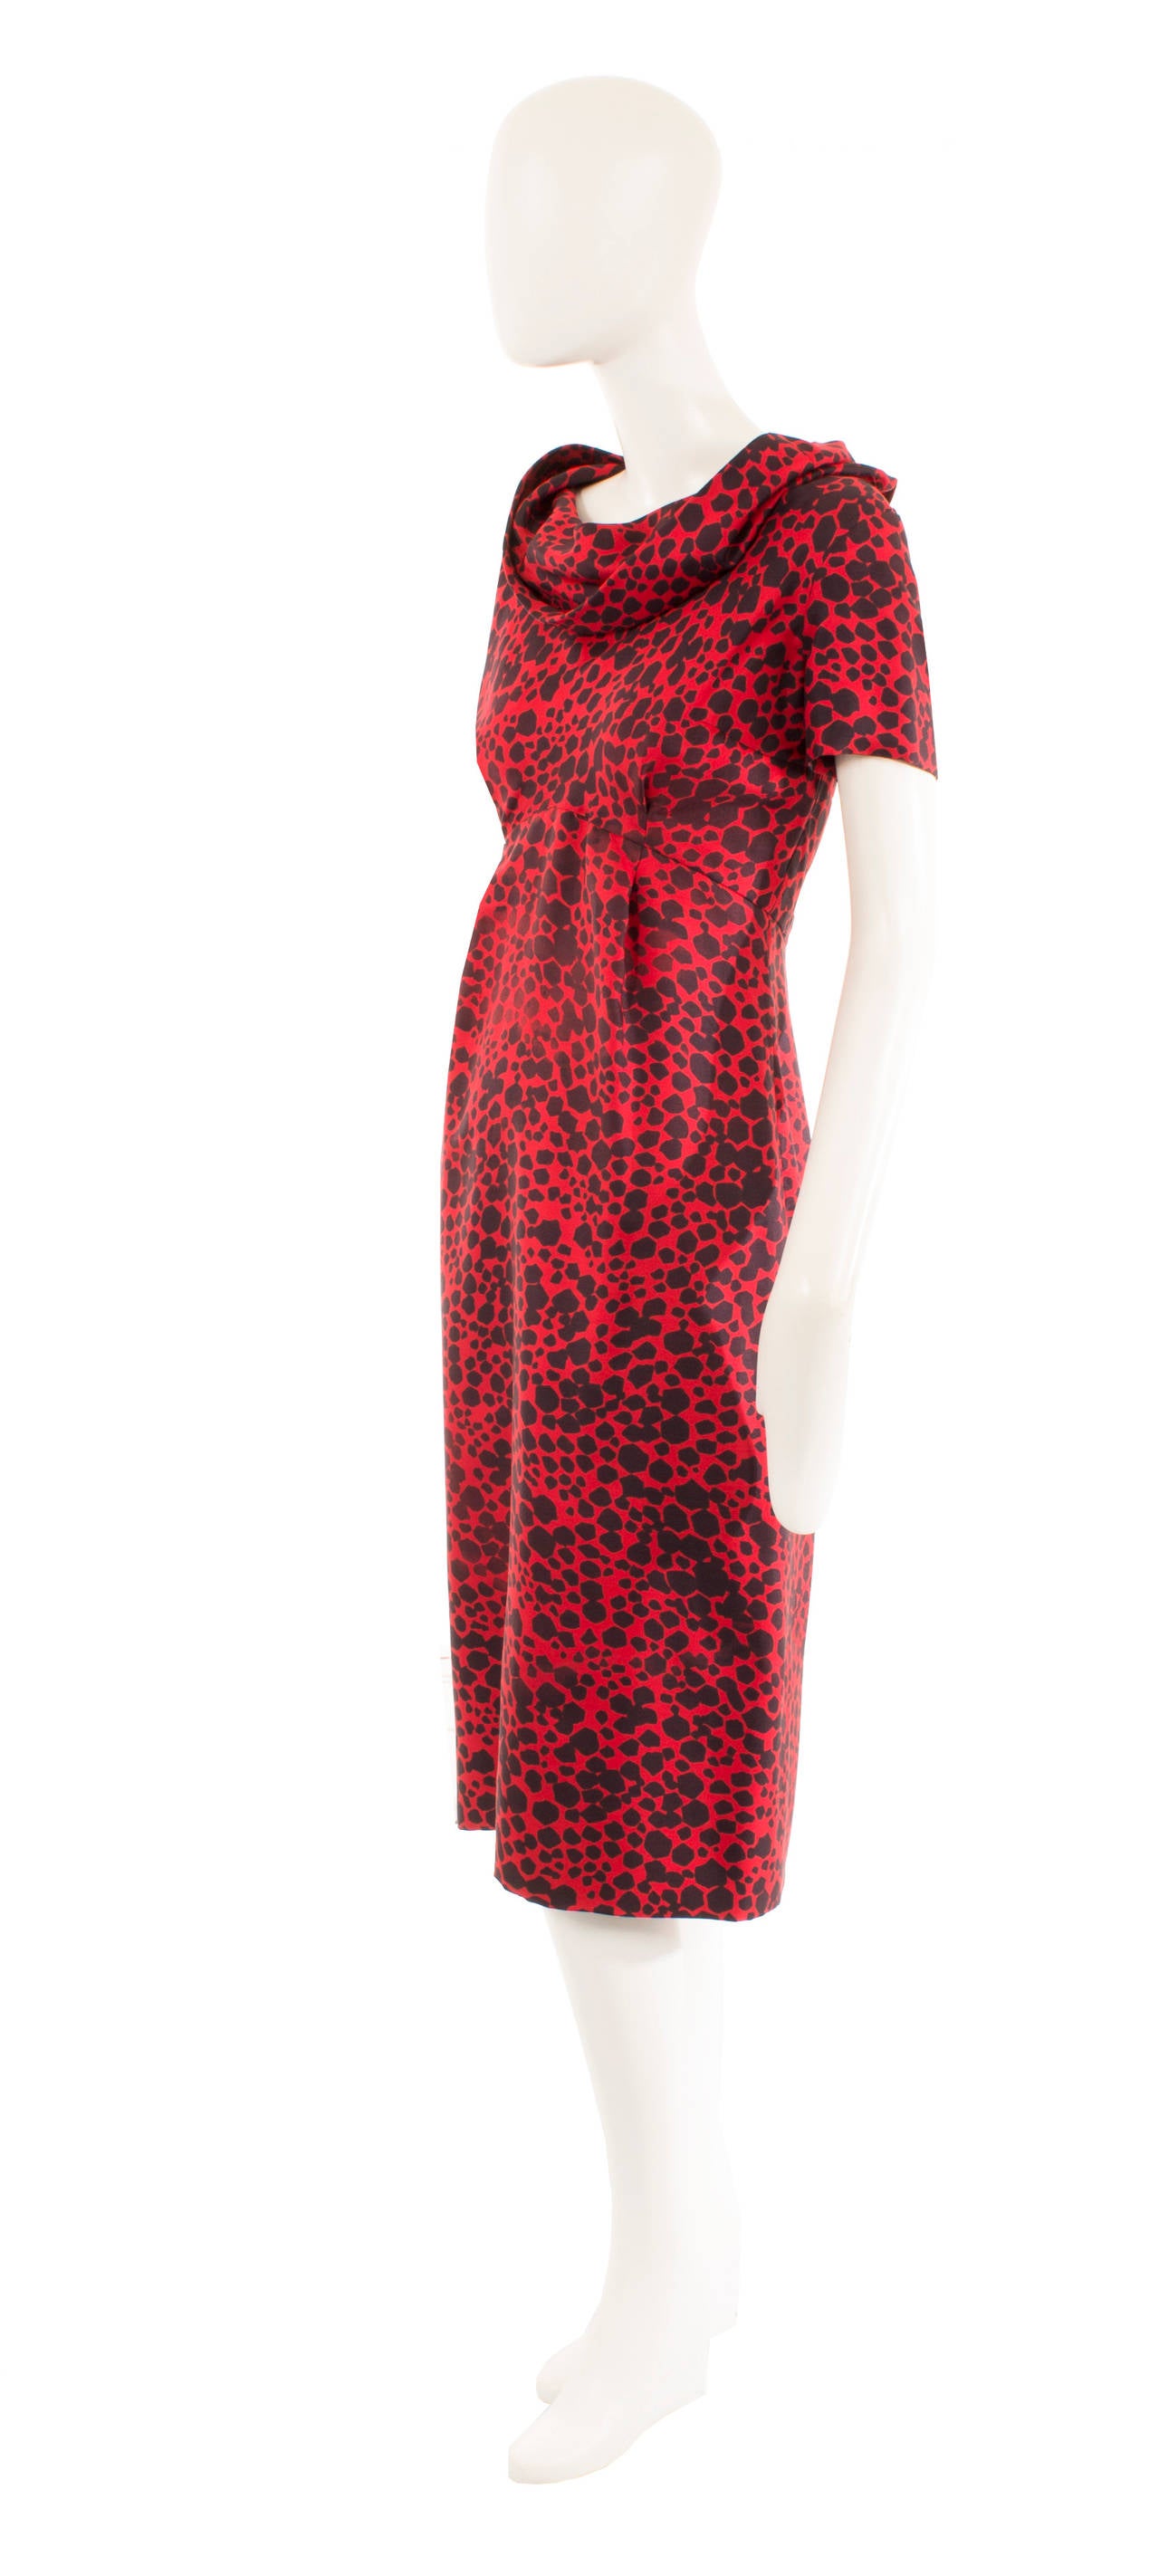 The perfect way of introducing vintage into a modern wardrobe, this dress was designed while Antonio Castillo was head designer at the house of Lanvin. Highly contemporary, this dress would make a bold and colourful option for the office or